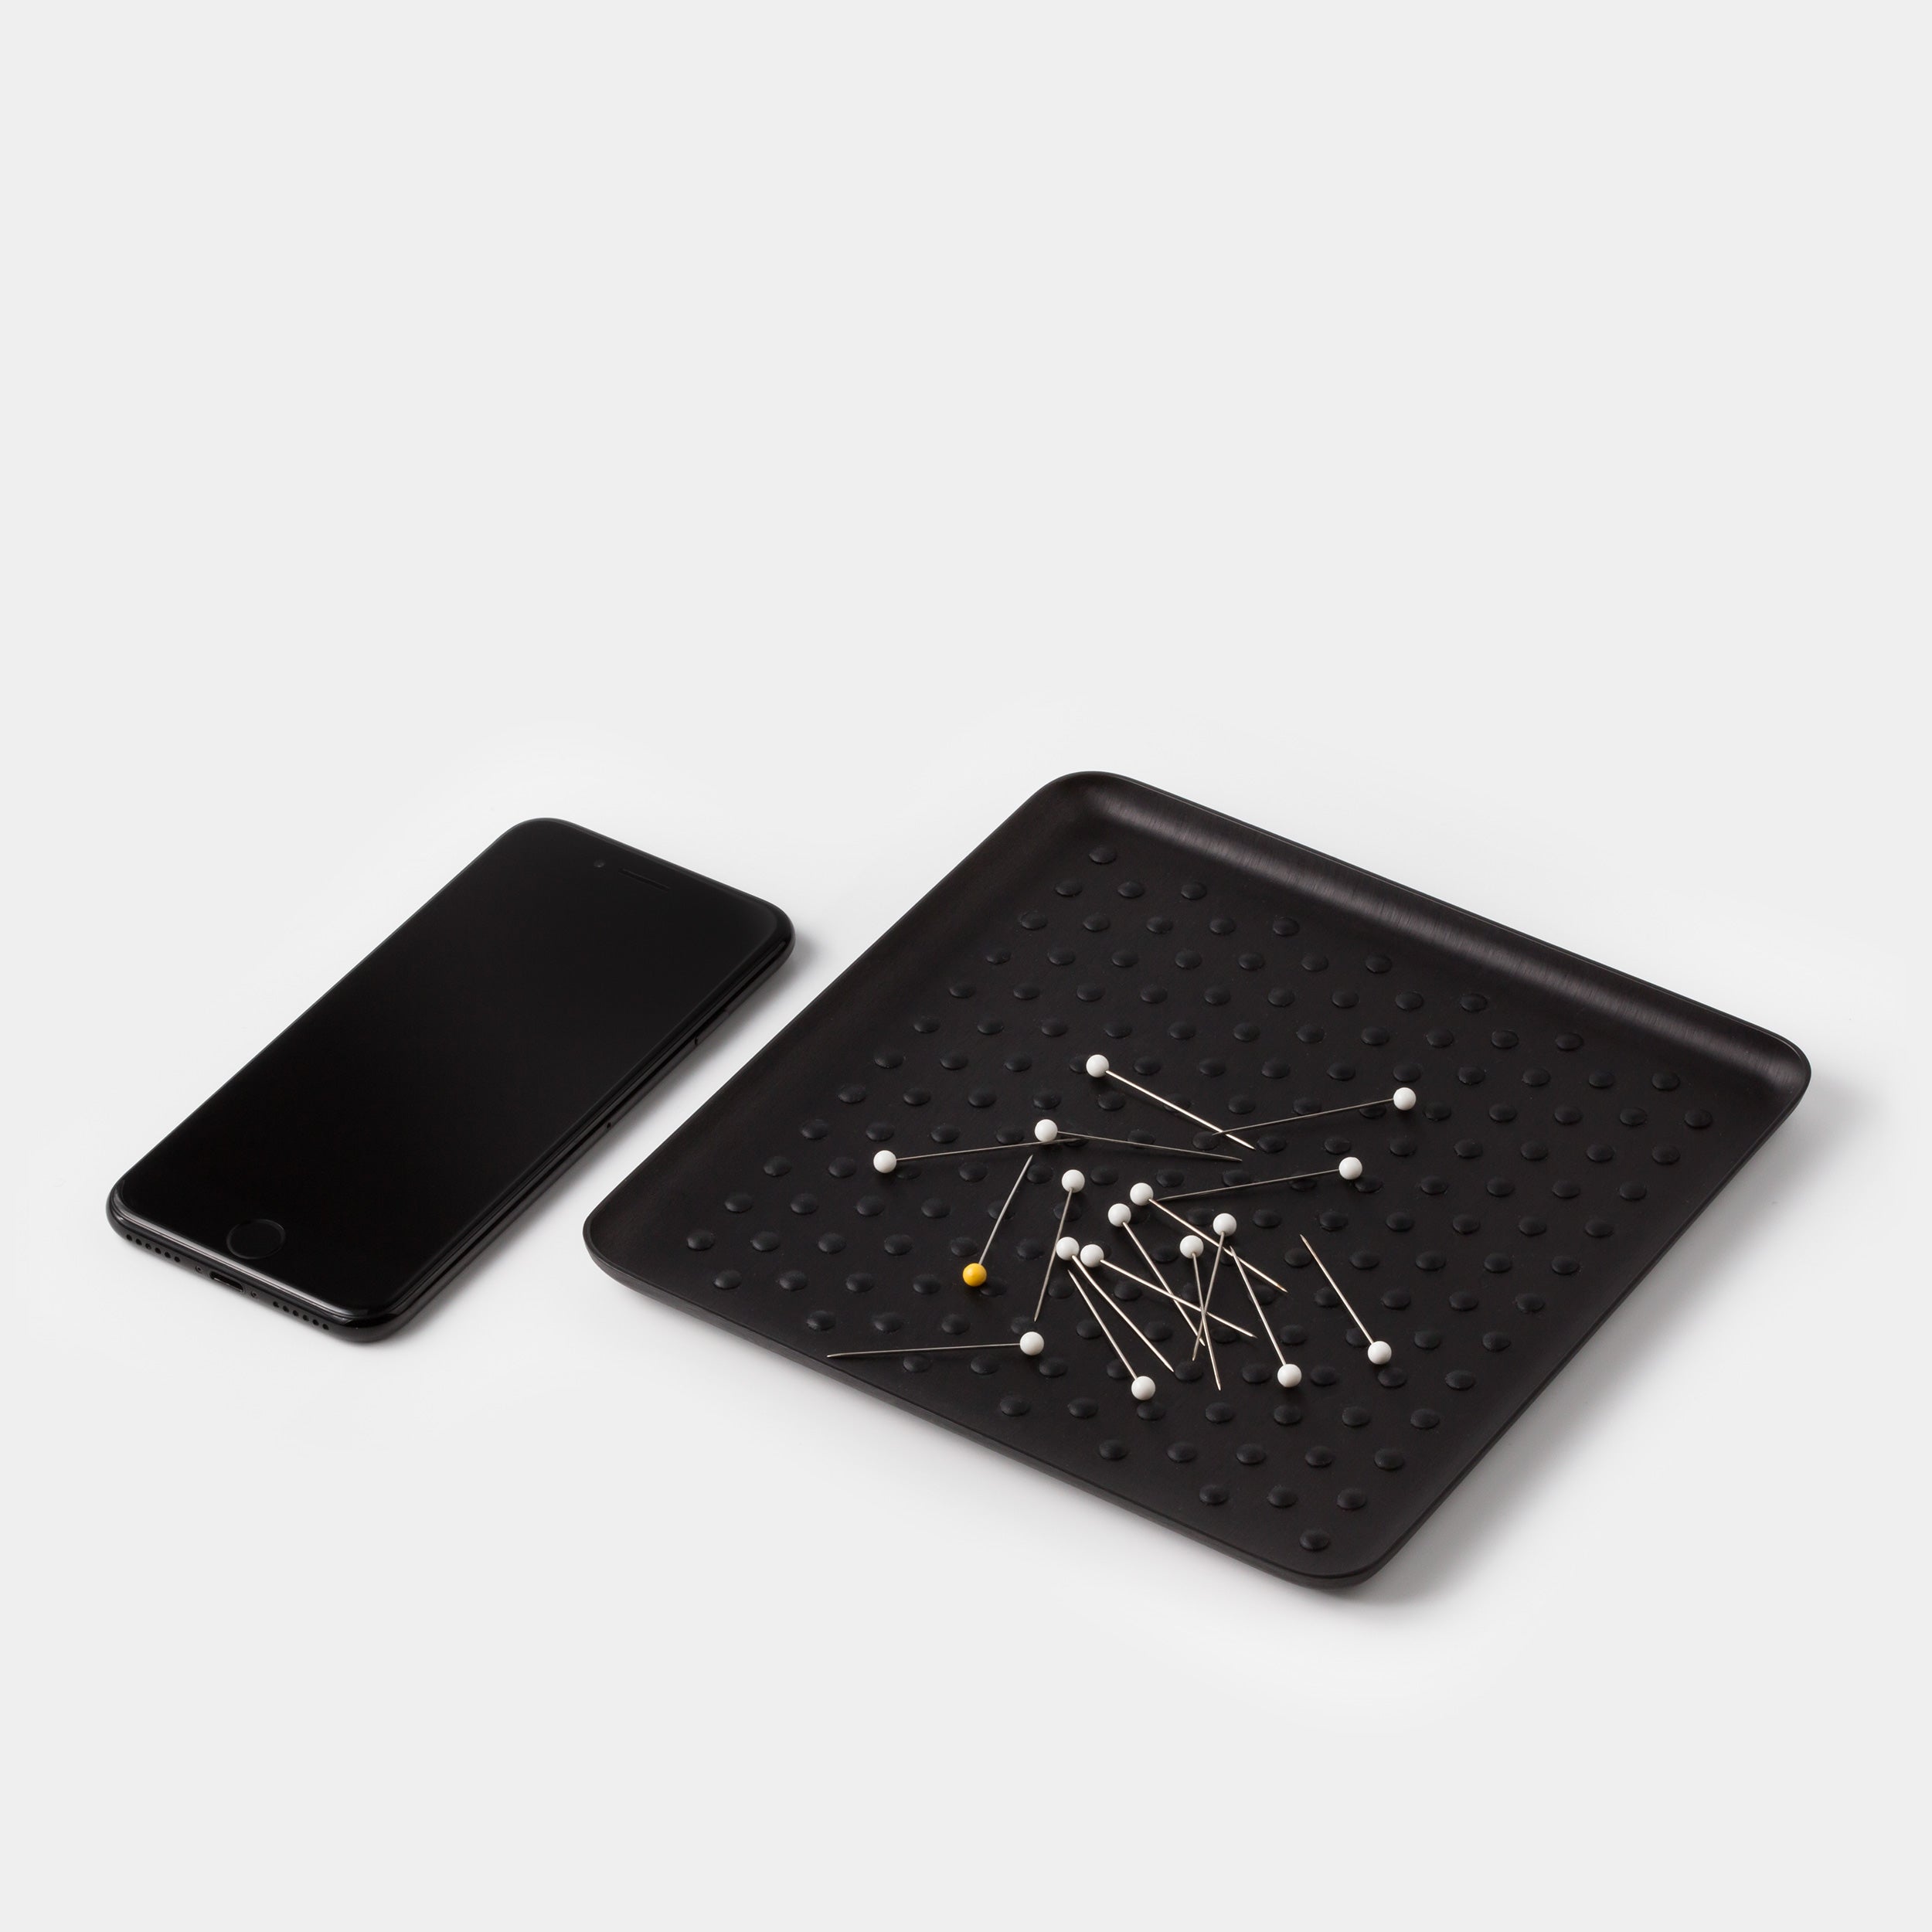 Kaymet Pressed Tray Black Grip with iPhone and pins